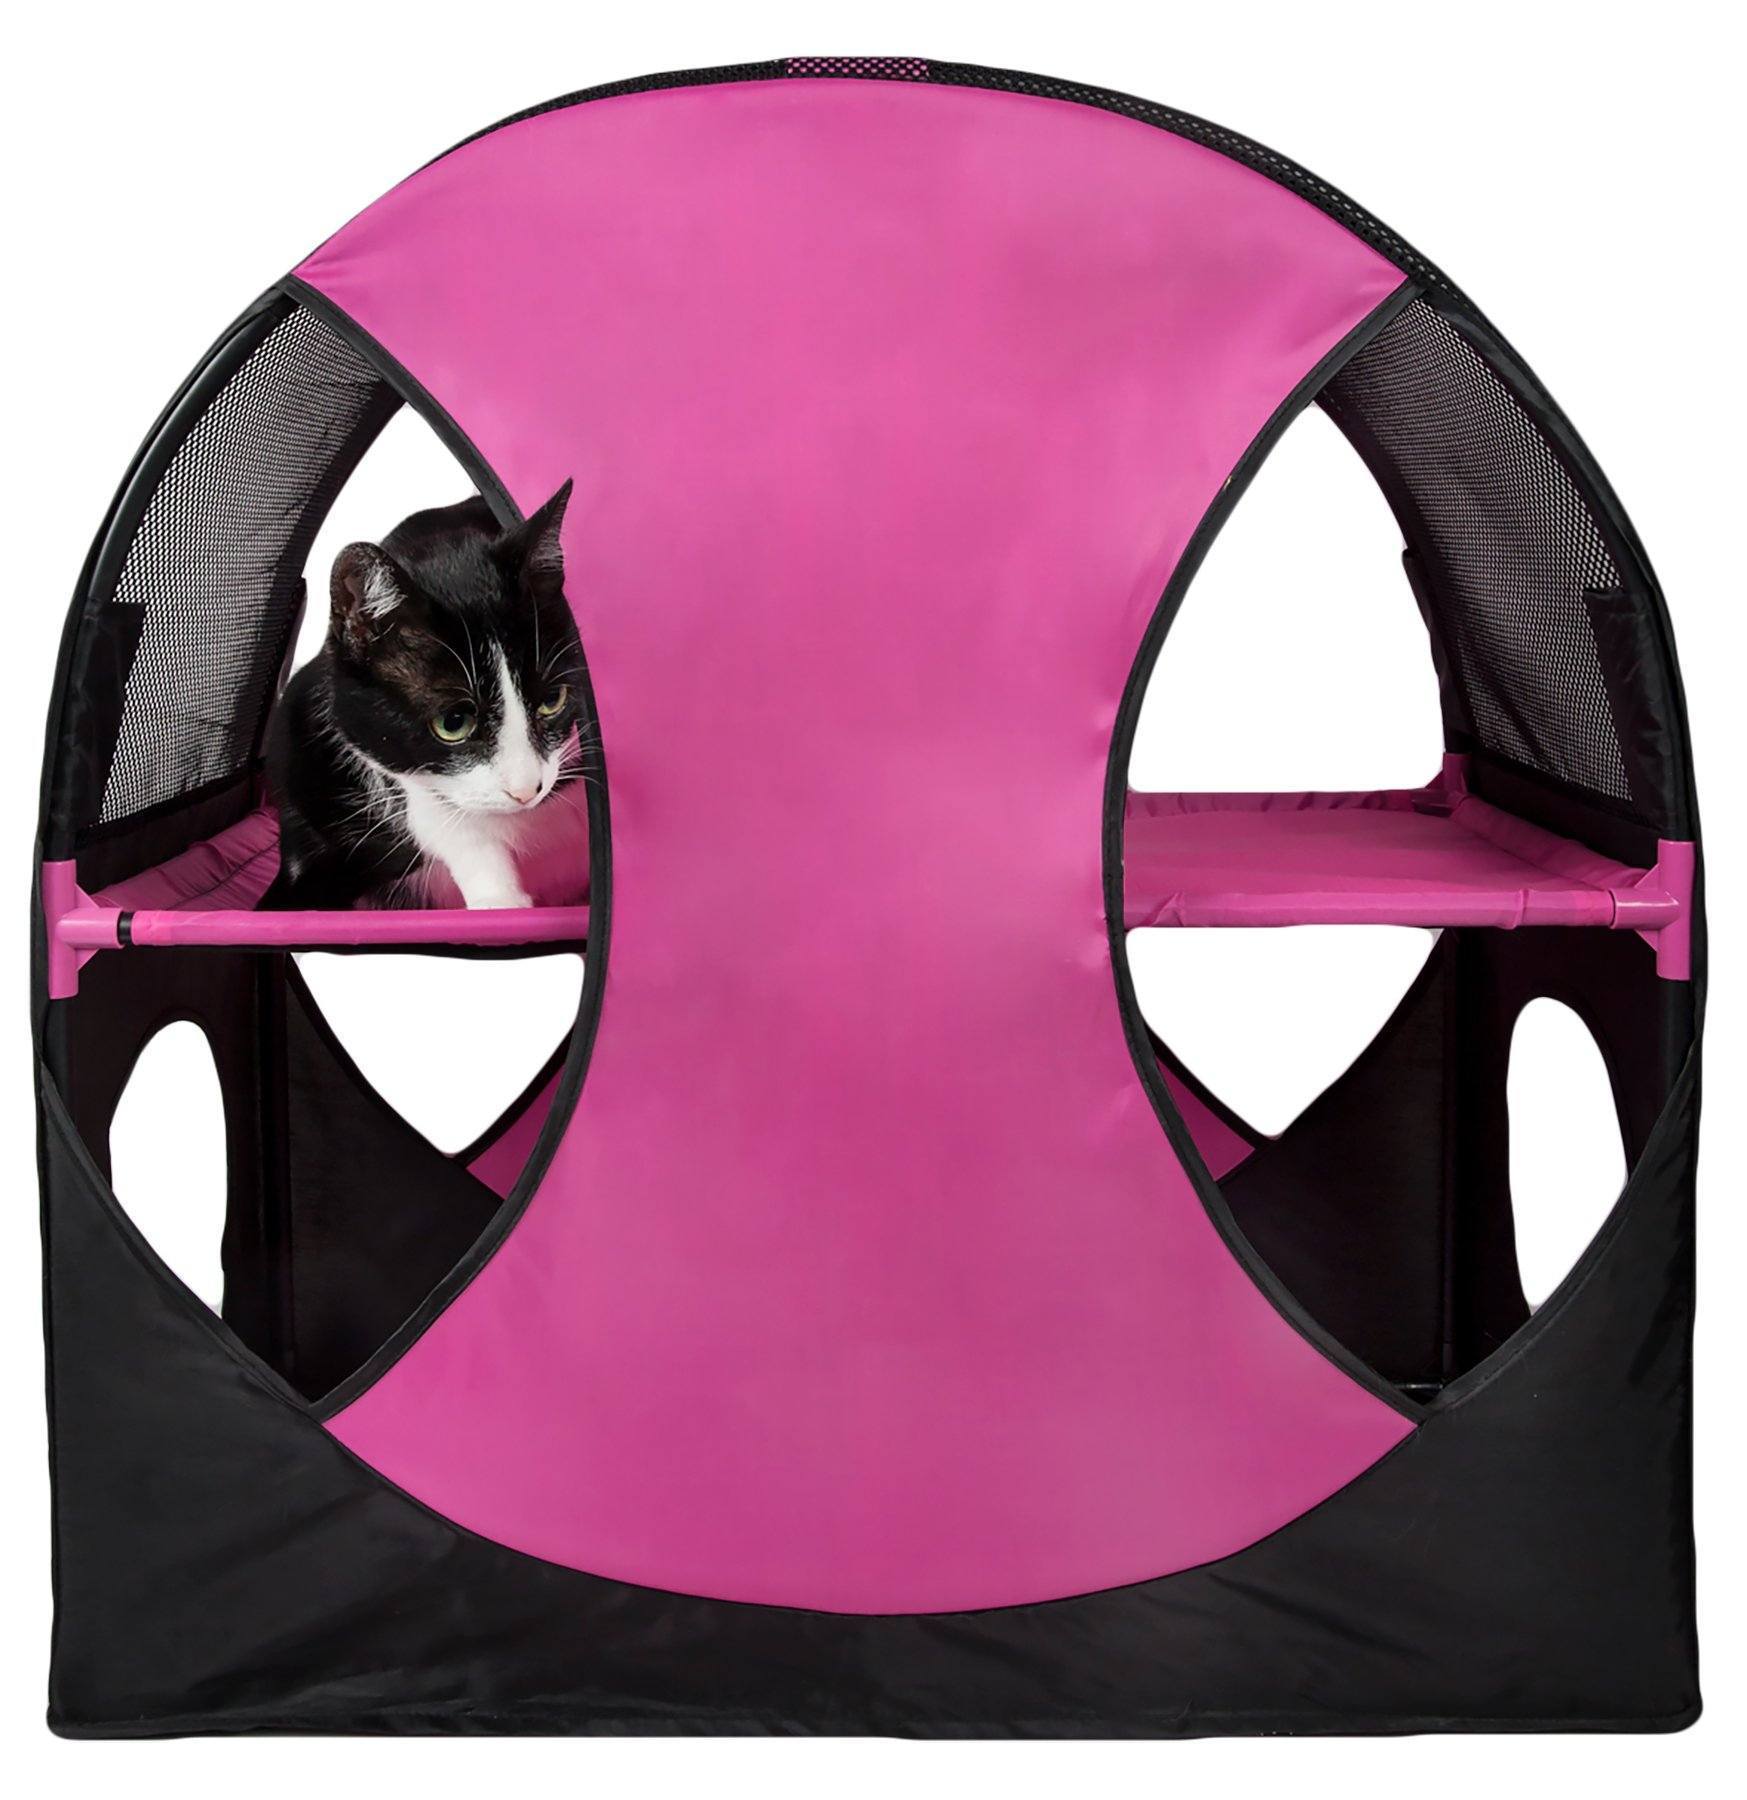 Pet Life ® 'Kitty-Play' Collapsible Travel Interactive Kitty Cat Tree Maze House Lounger Tunnel Lounge Pink, Black 